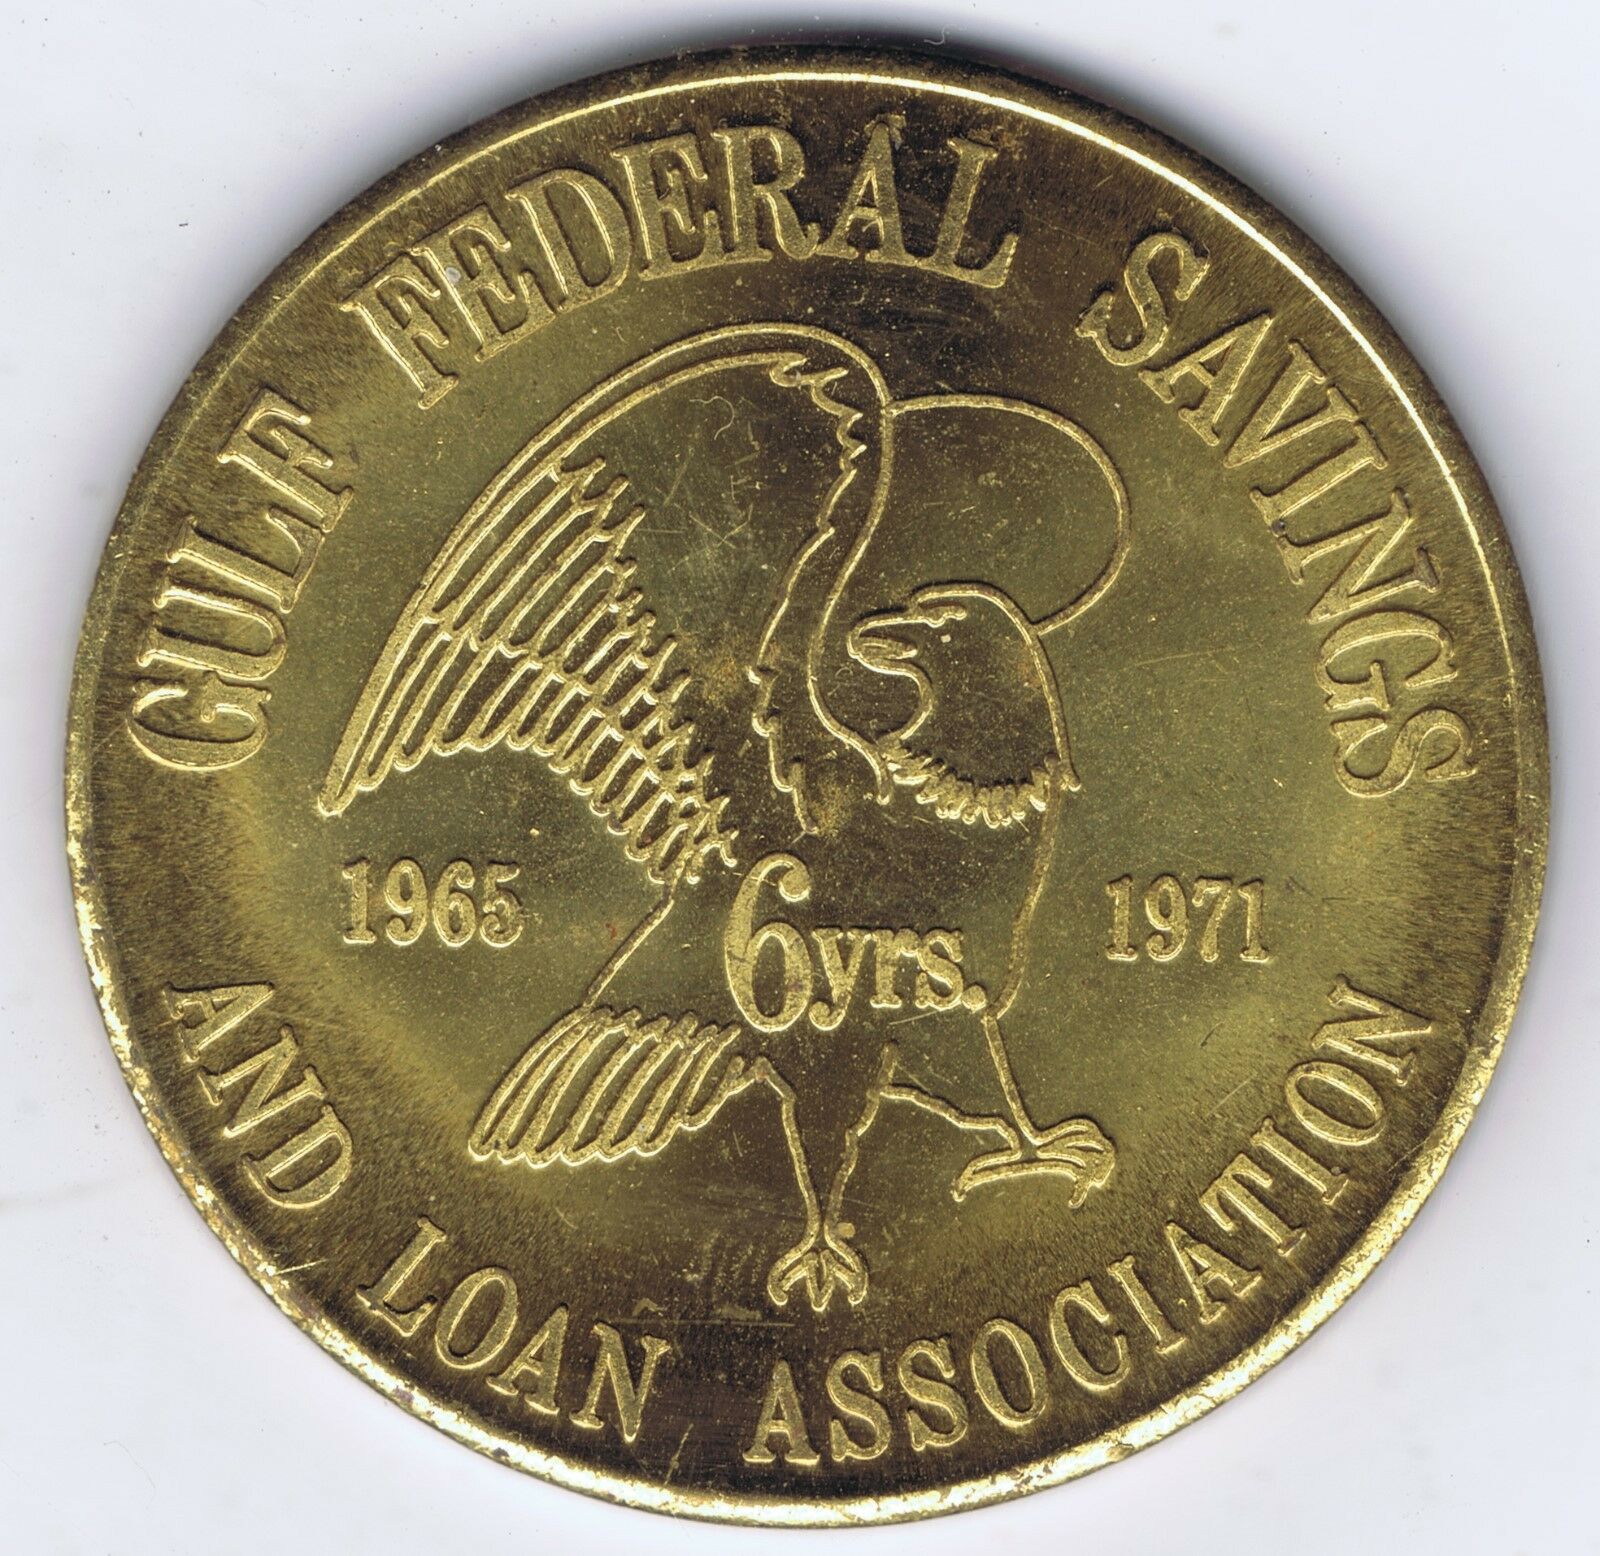 GULF FEDERAL SAVINGS & LOAN FT. MYERS (DEFUNCT) 6 YEAR EAGLE COMMEMORATIVE TOKEN